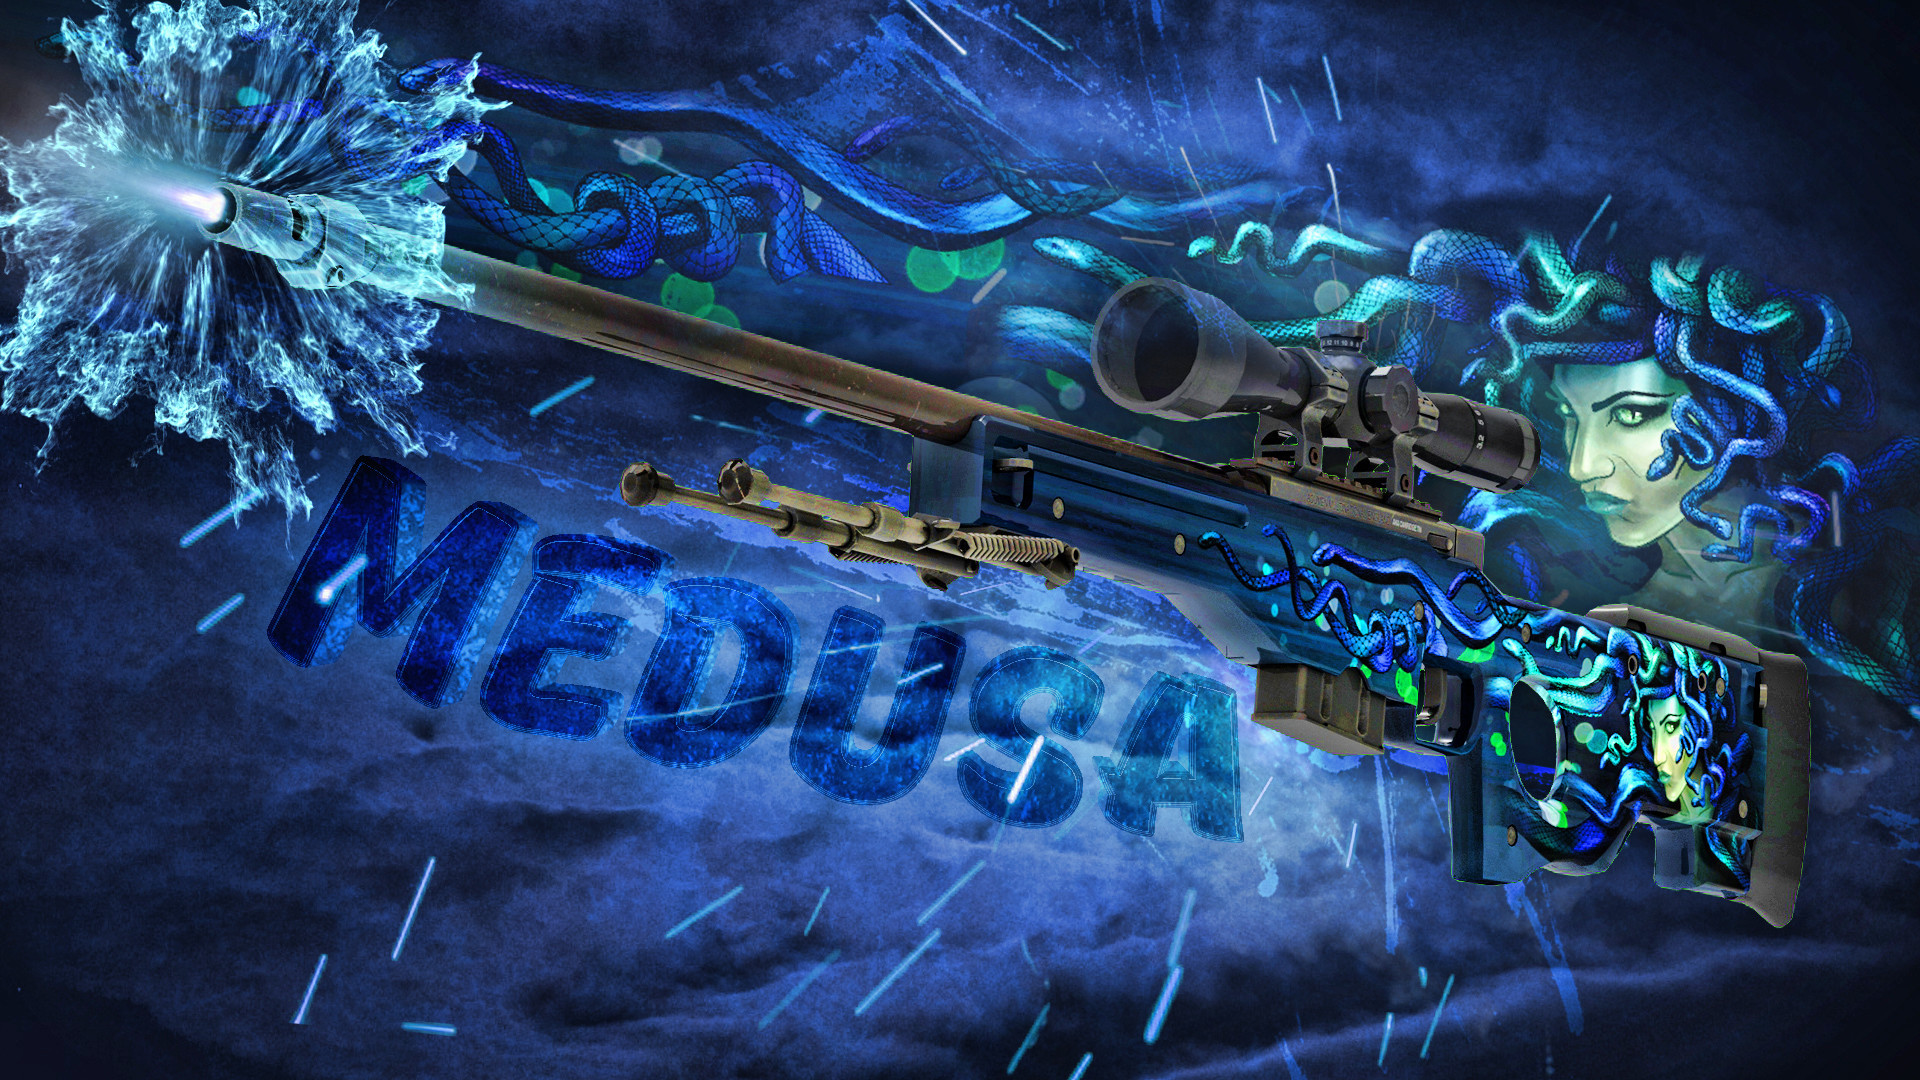 1920x1080 1920x1200 CS:GO Weapon Skin Wallpapers on Behance | My CSGO collection |  Pinterest | Weapons